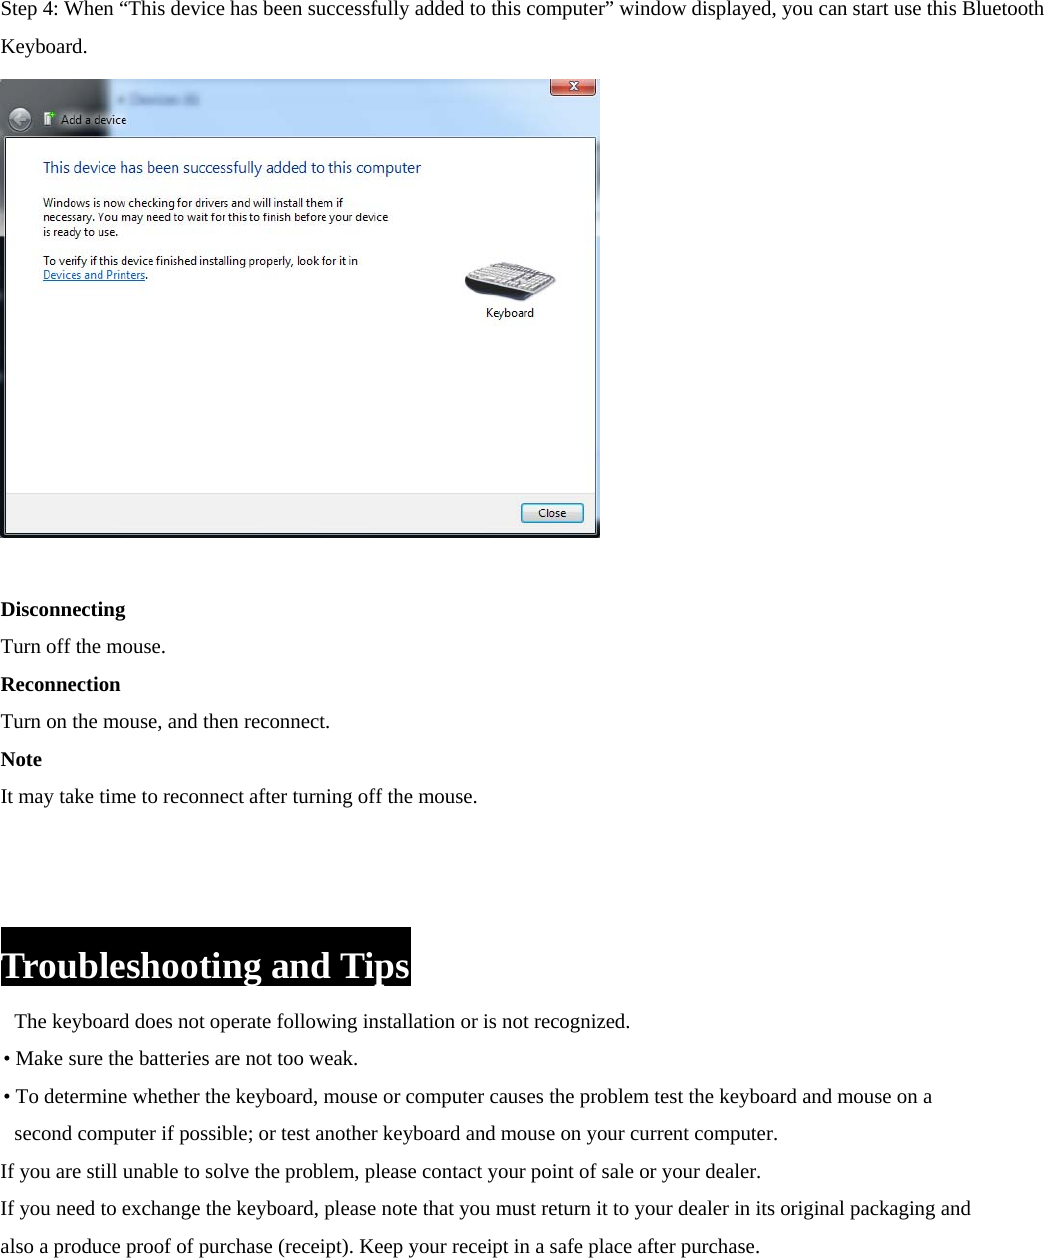  Step 4: When “This device has been successfully added to this computer” window displayed, you can start use this Bluetooth Keyboard.      Disconnecting Turn off the mouse. Reconnection Turn on the mouse, and then reconnect. Note It may take time to reconnect after turning off the mouse.    Troubleshooting and Tips The keyboard does not operate following installation or is not recognized.   • Make sure the batteries are not too weak. • To determine whether the keyboard, mouse or computer causes the problem test the keyboard and mouse on a   second computer if possible; or test another keyboard and mouse on your current computer. If you are still unable to solve the problem, please contact your point of sale or your dealer. If you need to exchange the keyboard, please note that you must return it to your dealer in its original packaging and   also a produce proof of purchase (receipt). Keep your receipt in a safe place after purchase.          